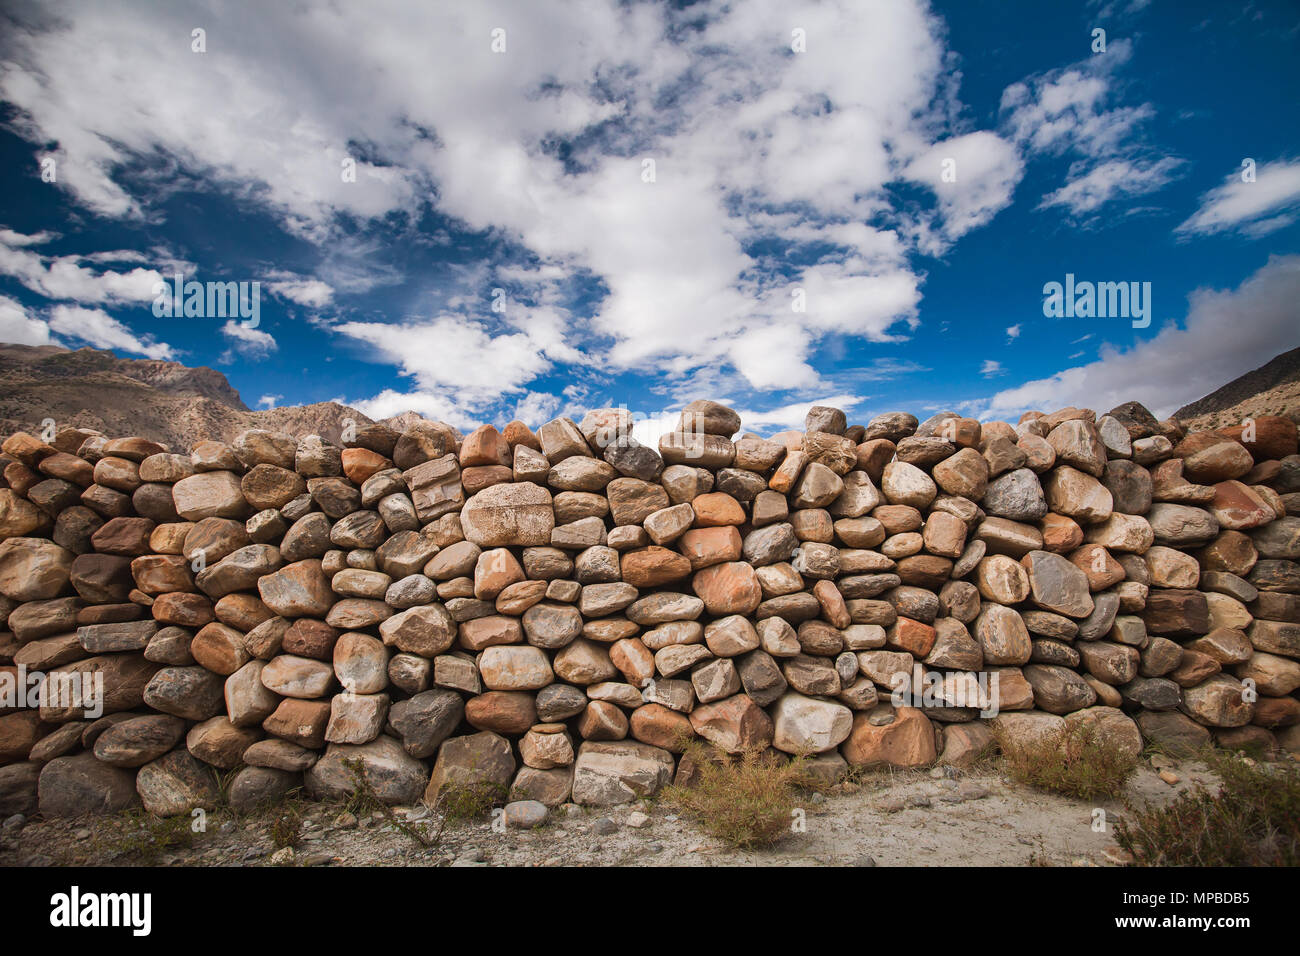 The stone wall constructed from the different sizes the boulders in grey, brown, tawny tints. Bright blue sky with white clouds. Ideal background for the illustrations and collages. Stock Photo